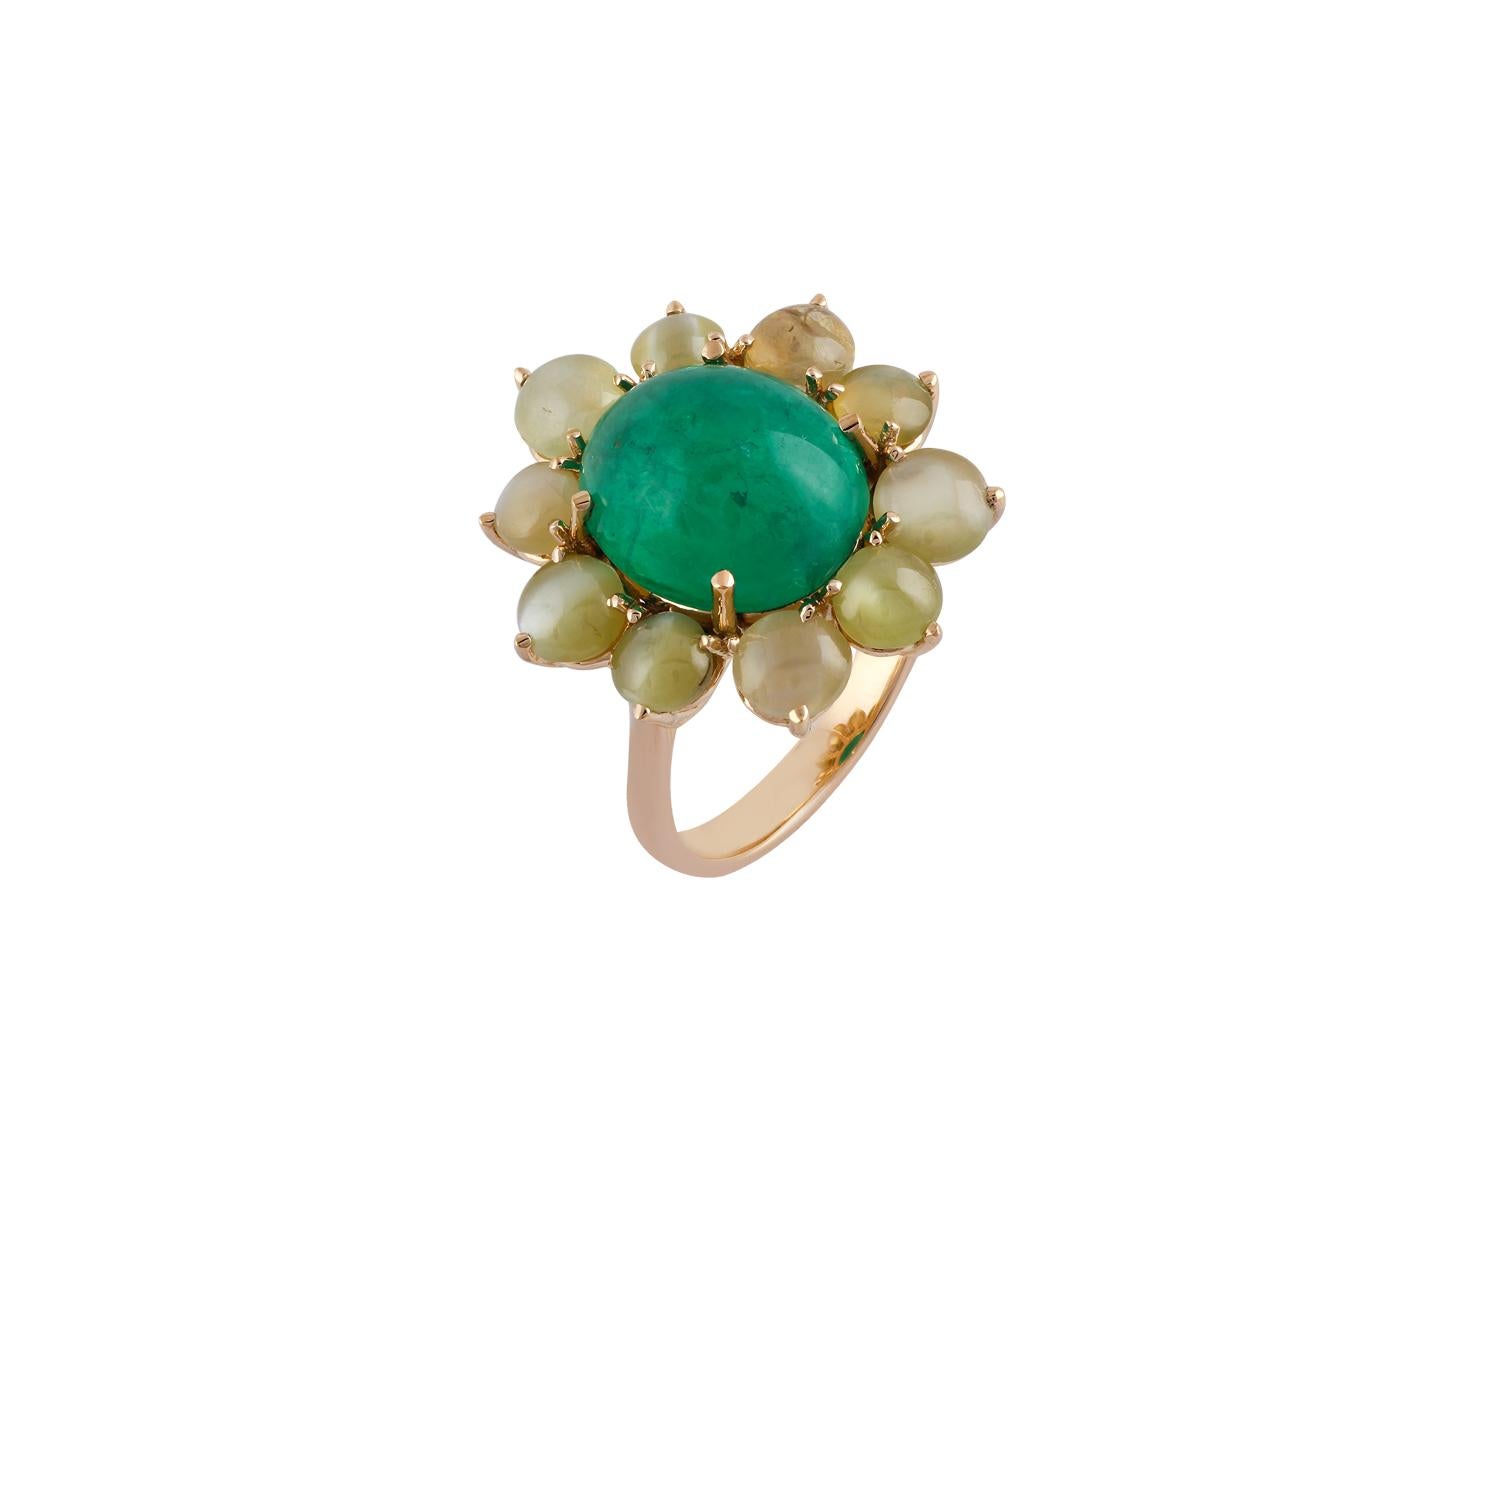 7.3 Carat Cabochon Emerald  & Cats Eye Ring in 18k Yellow Gold   In New Condition For Sale In Jaipur, Rajasthan